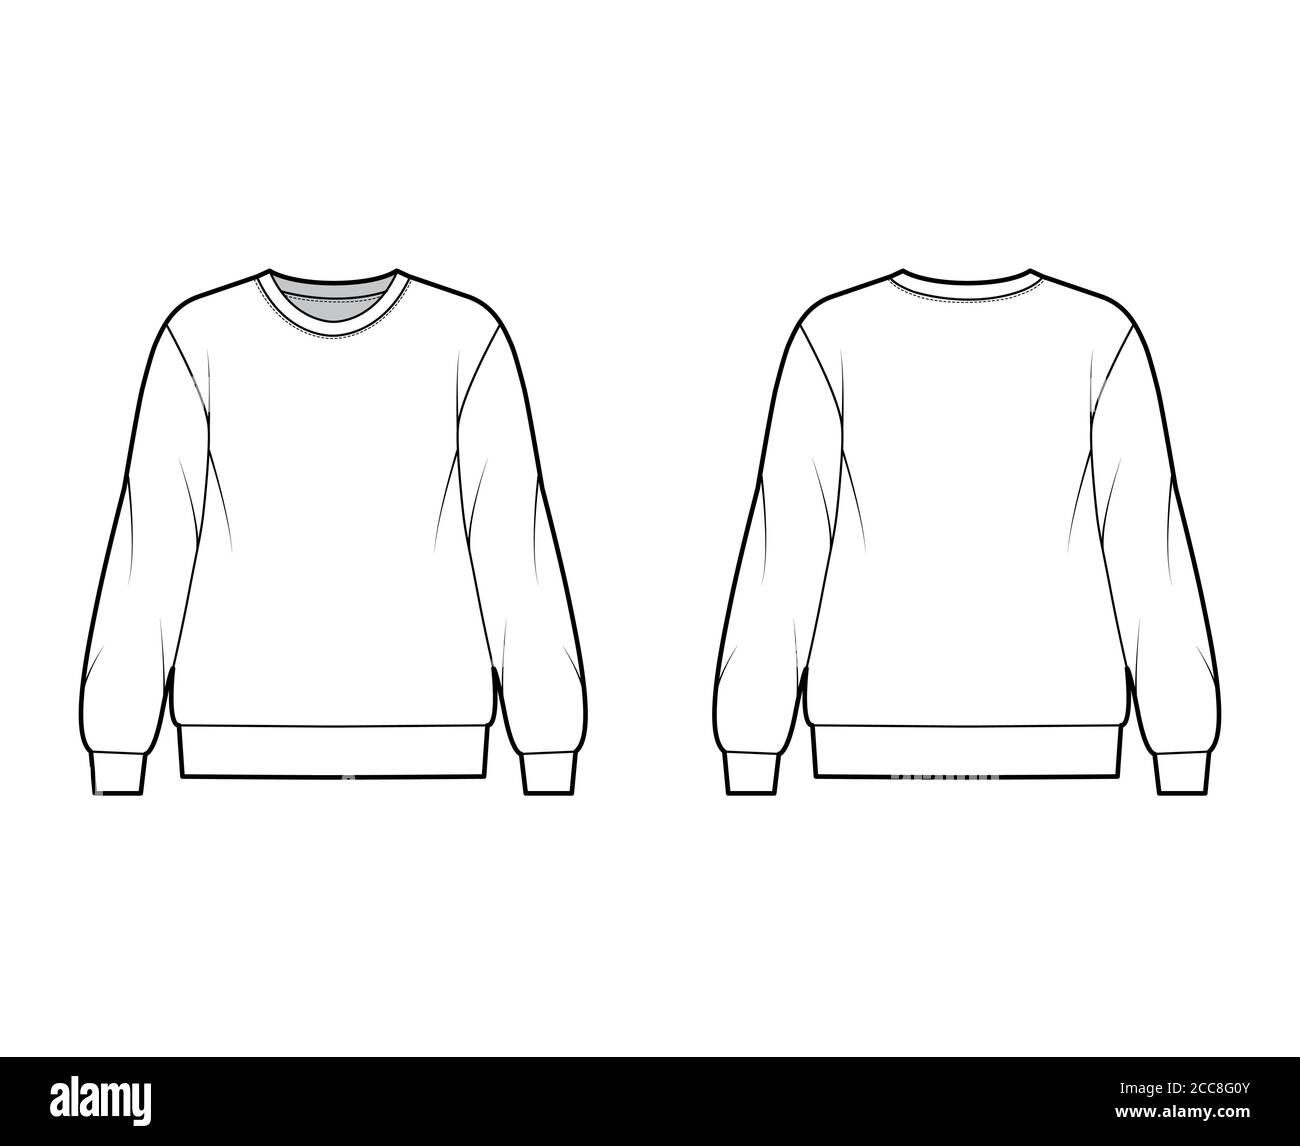 Cotton-terry oversized sweatshirt technical fashion illustration with relaxed fit, crew neckline, long sleeves. Flat outwear jumper apparel template front, back, white color. Women men, unisex top CAD Stock Vector